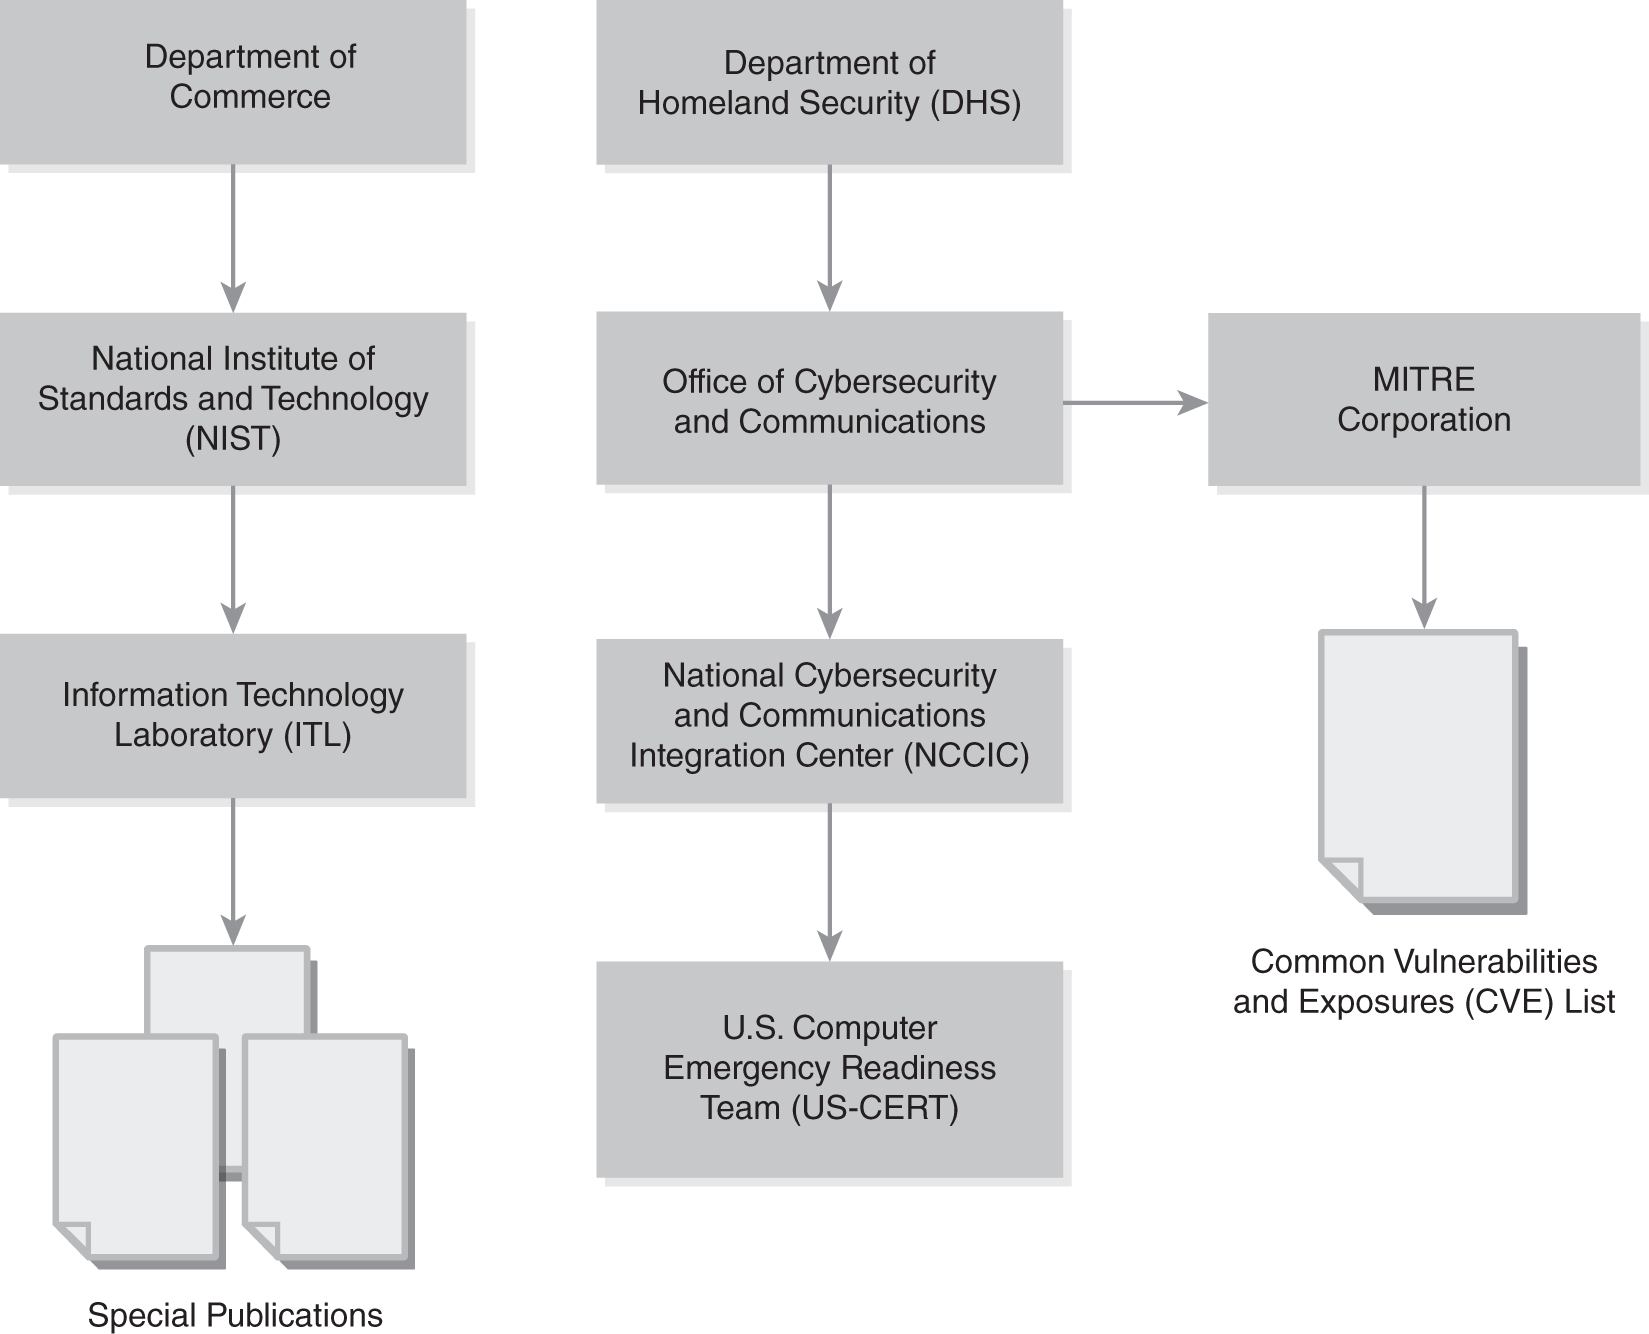 A hierarchy diagram listing U S federal government organizations involved in risk management initiatives and how they are related.